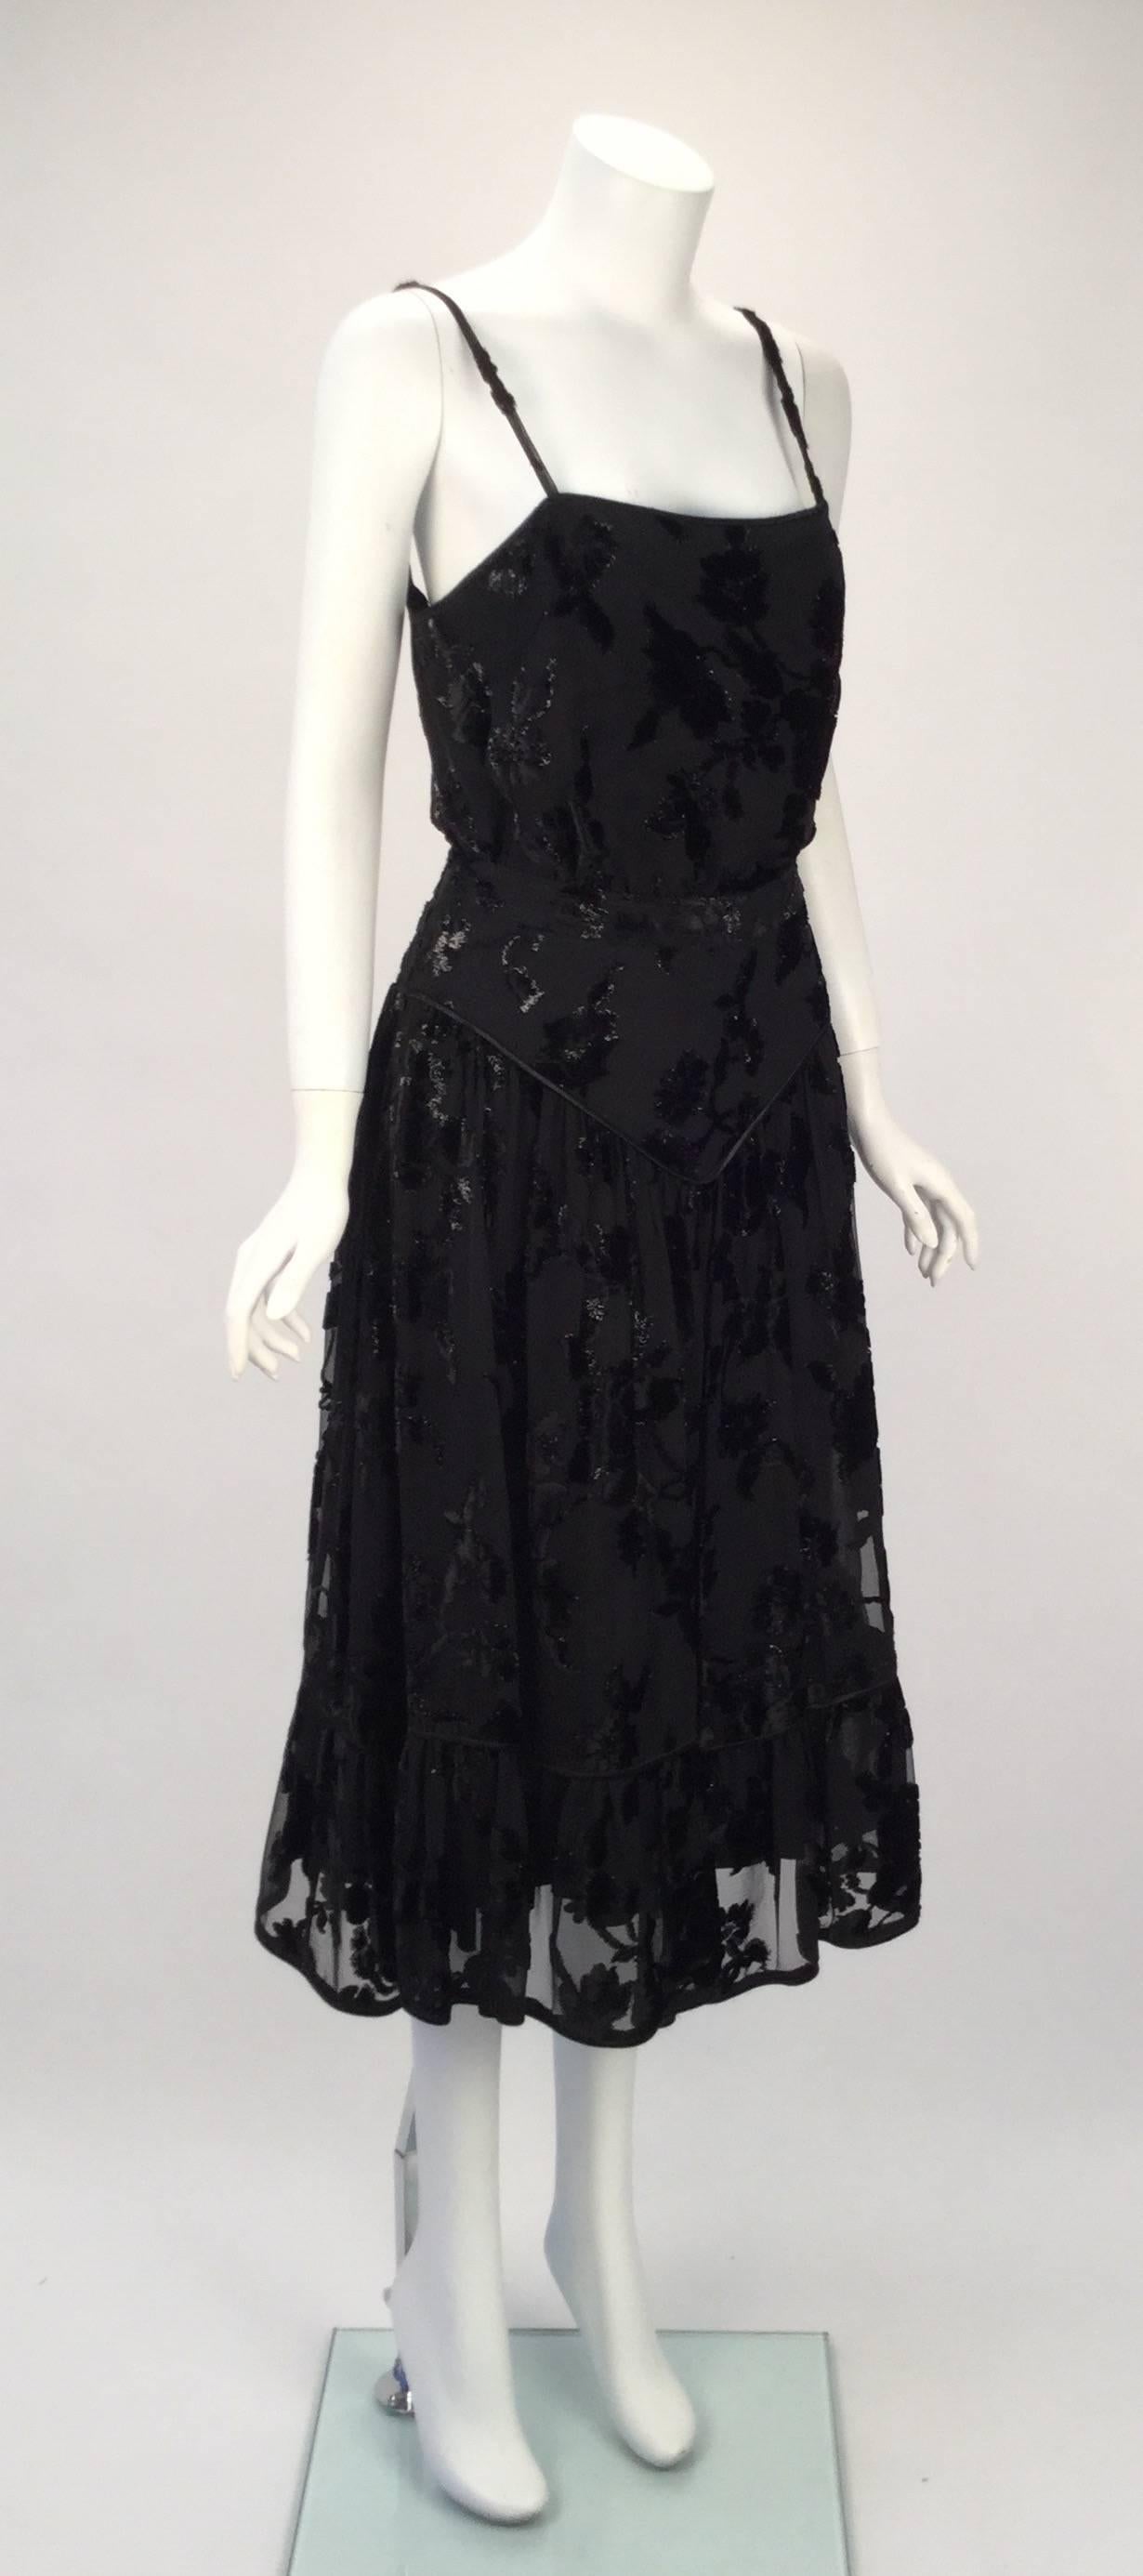 1980's Alan Austin top and skirt set. This striking top and skirt set is made of black chiffon and floral burn out velvet. The floral pattern is textured with metallic and velvet thread. The top is loose with spaghetti straps on a square neckline in